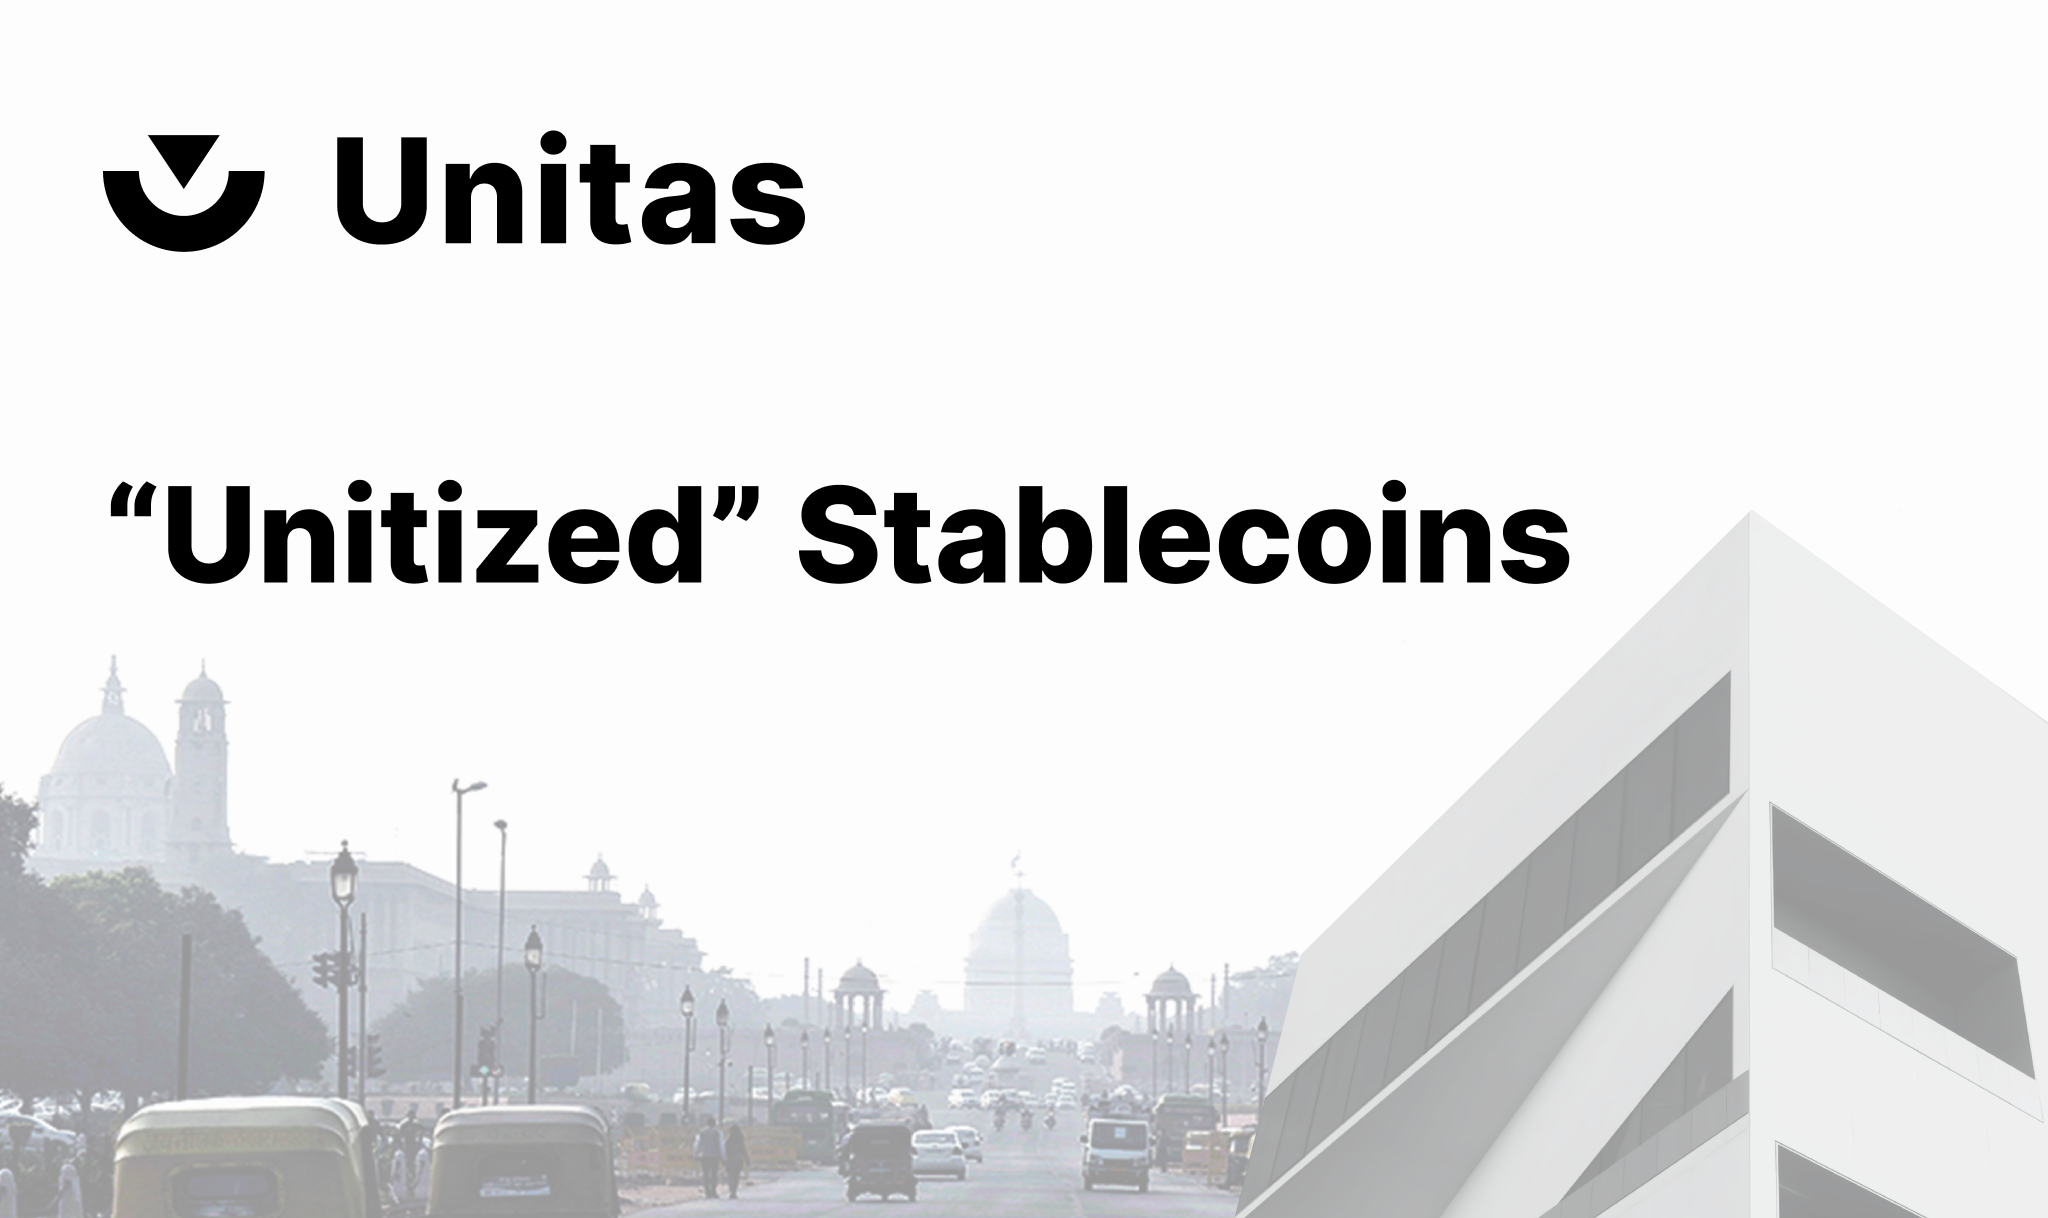 , First “Unitized” Stablecoin Protocol: Unitas Foundation Releases Whitepaper